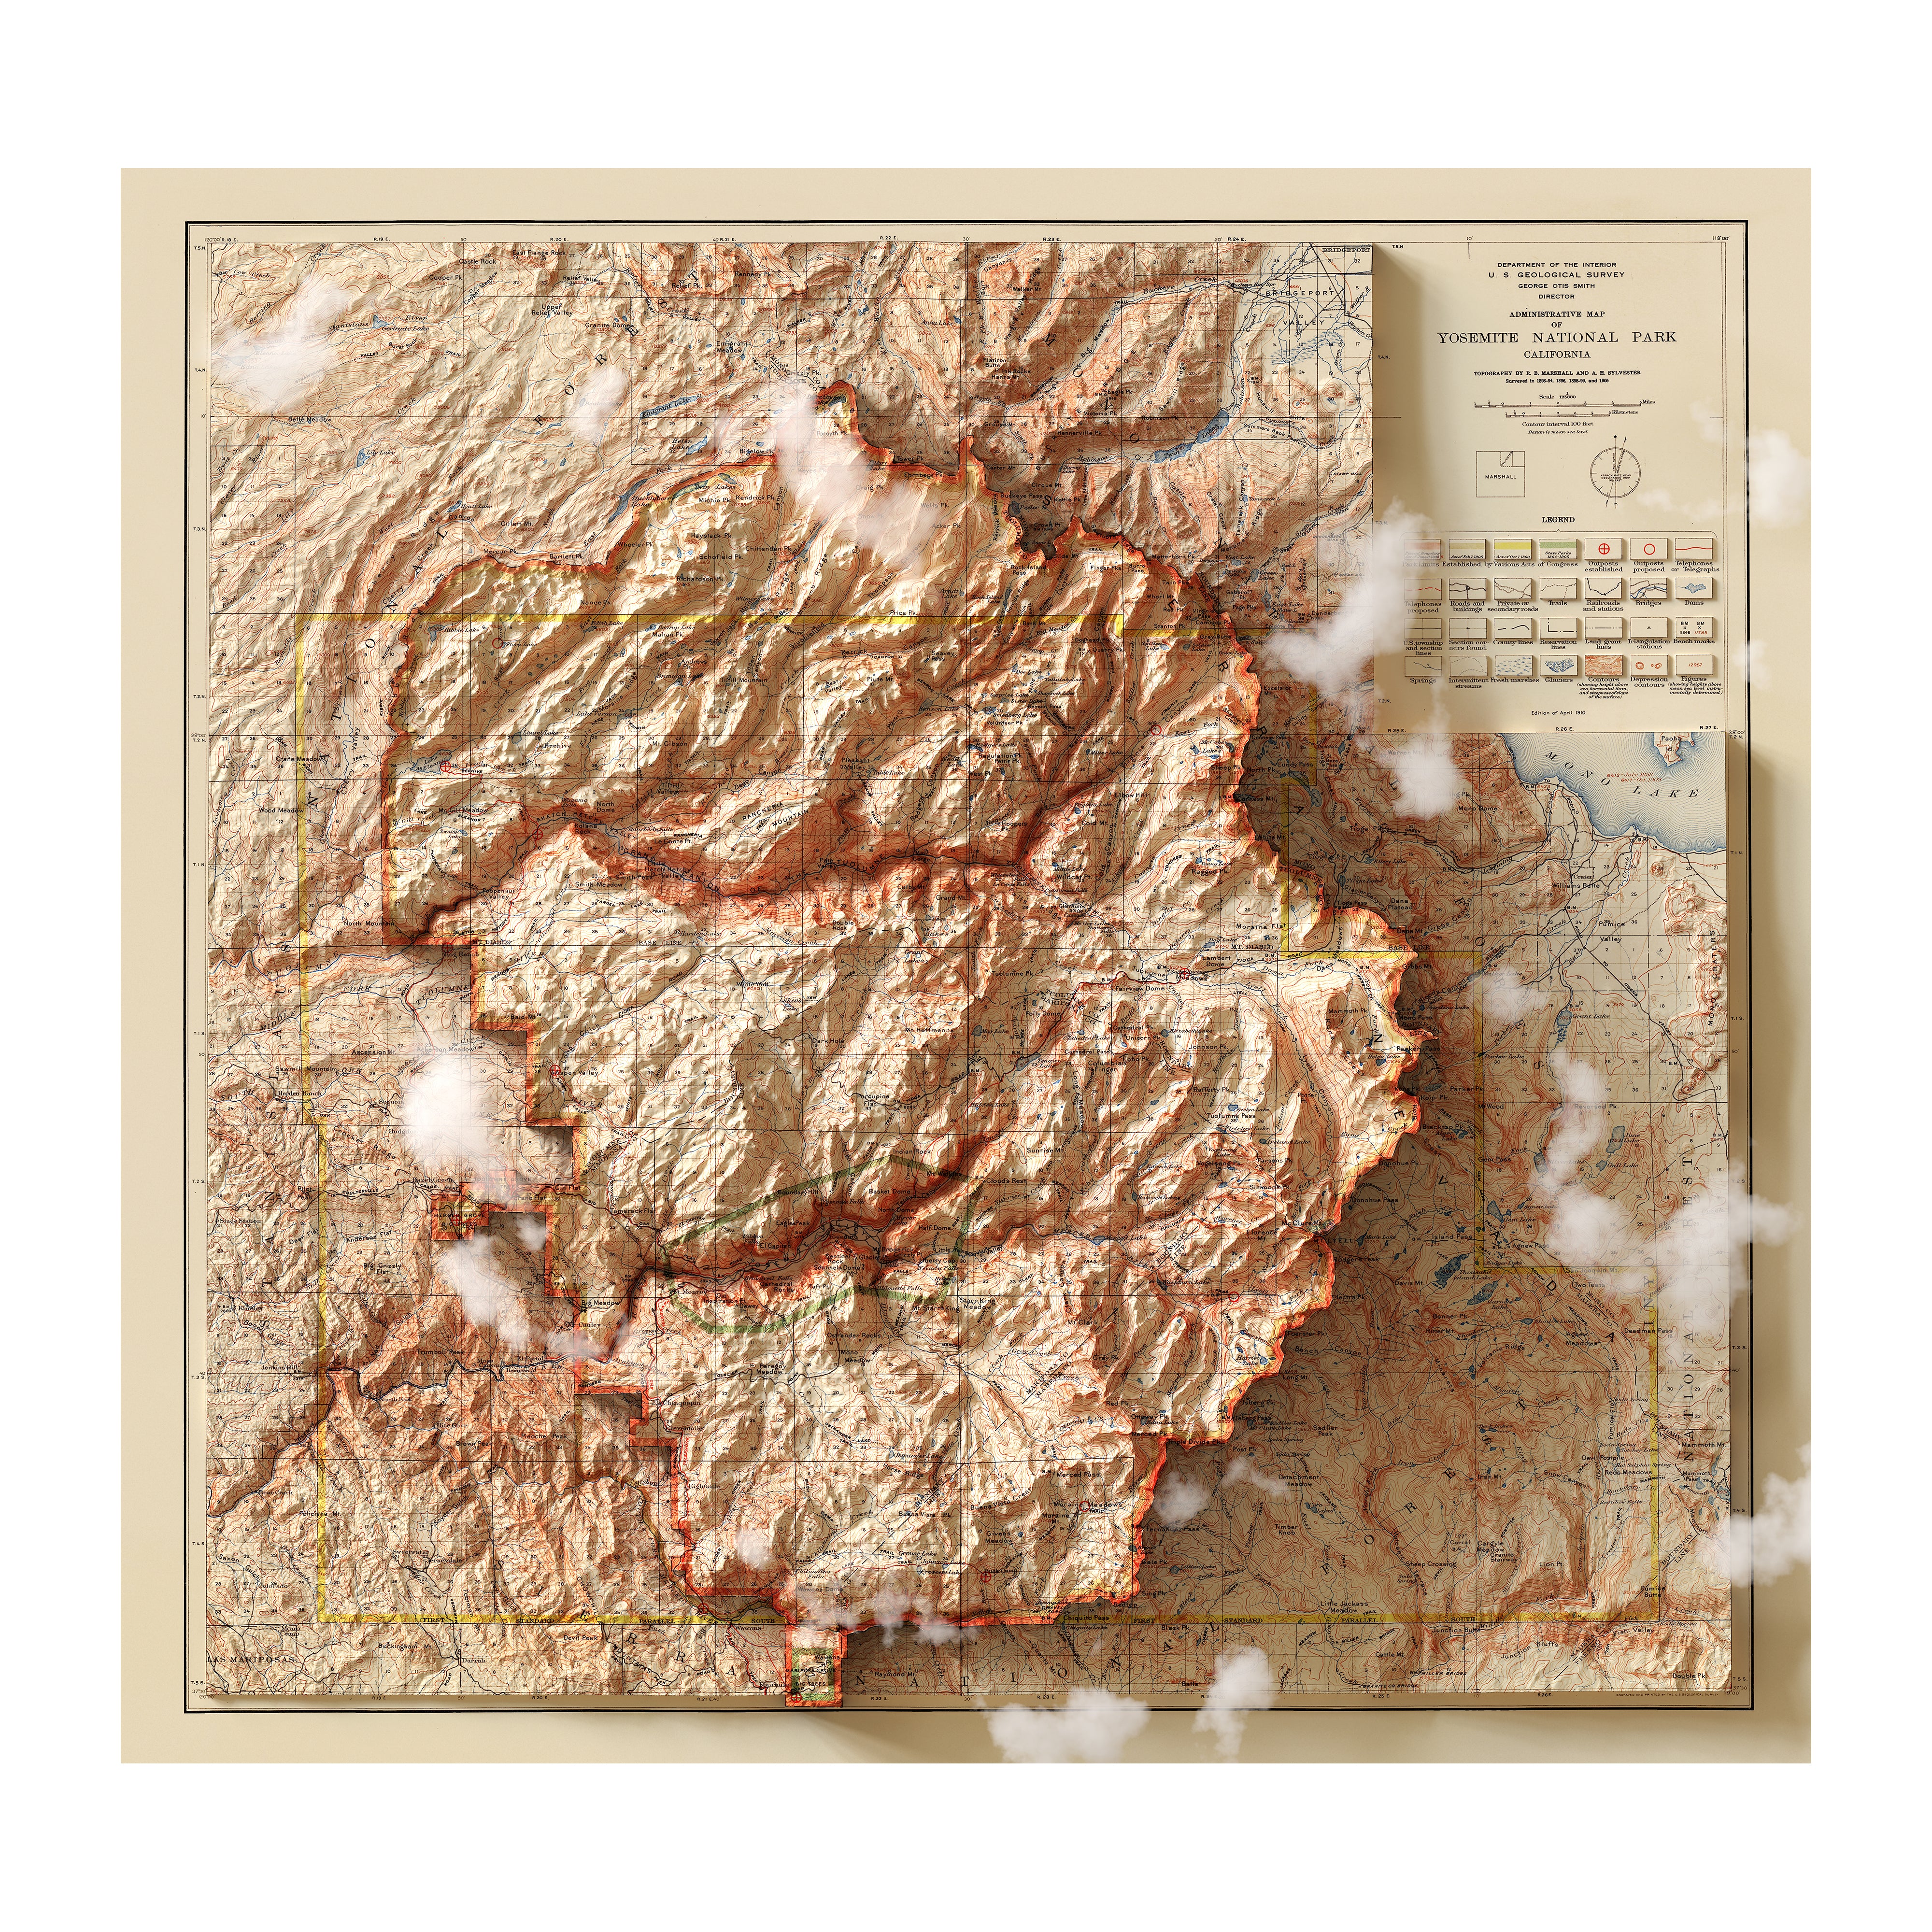 Vintage Relief Map of Yosemite National Park - 1910